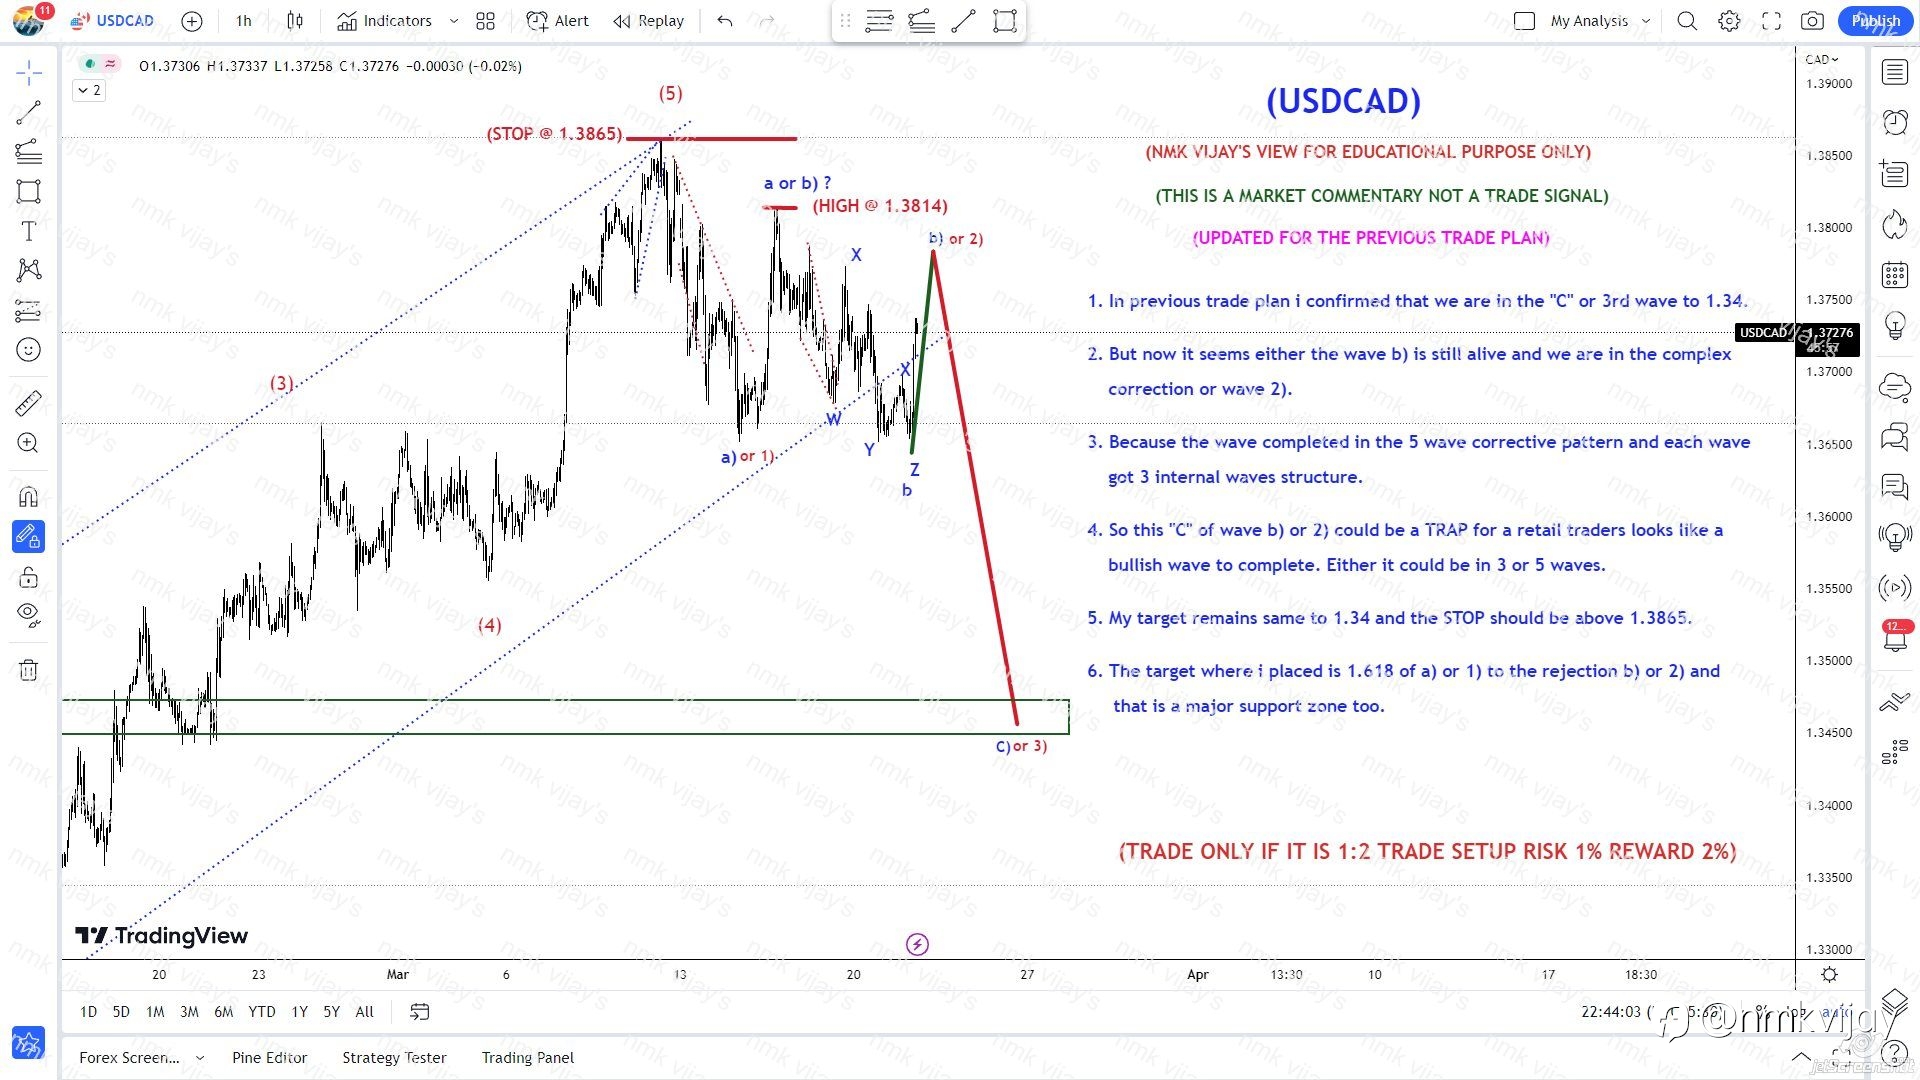 USDCAD-Updated for the previous trade plan Target remains 1.34